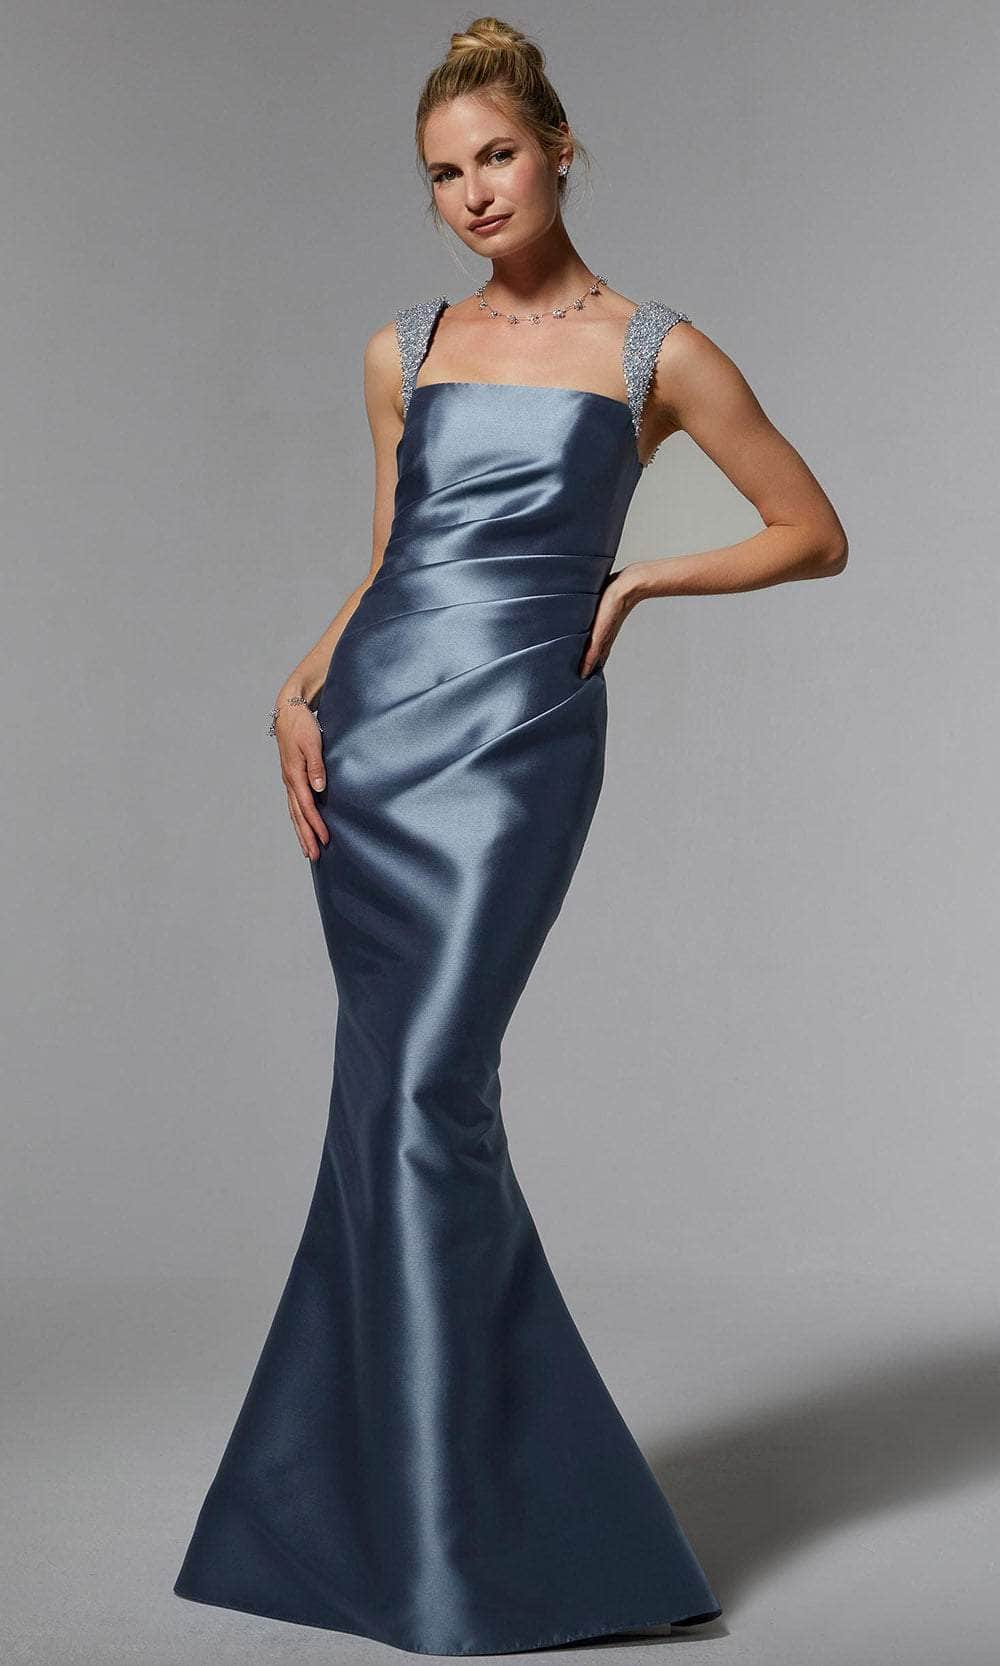 Image of MGNY By Mori Lee 72925 - Bejeweled Satin Evening Gown